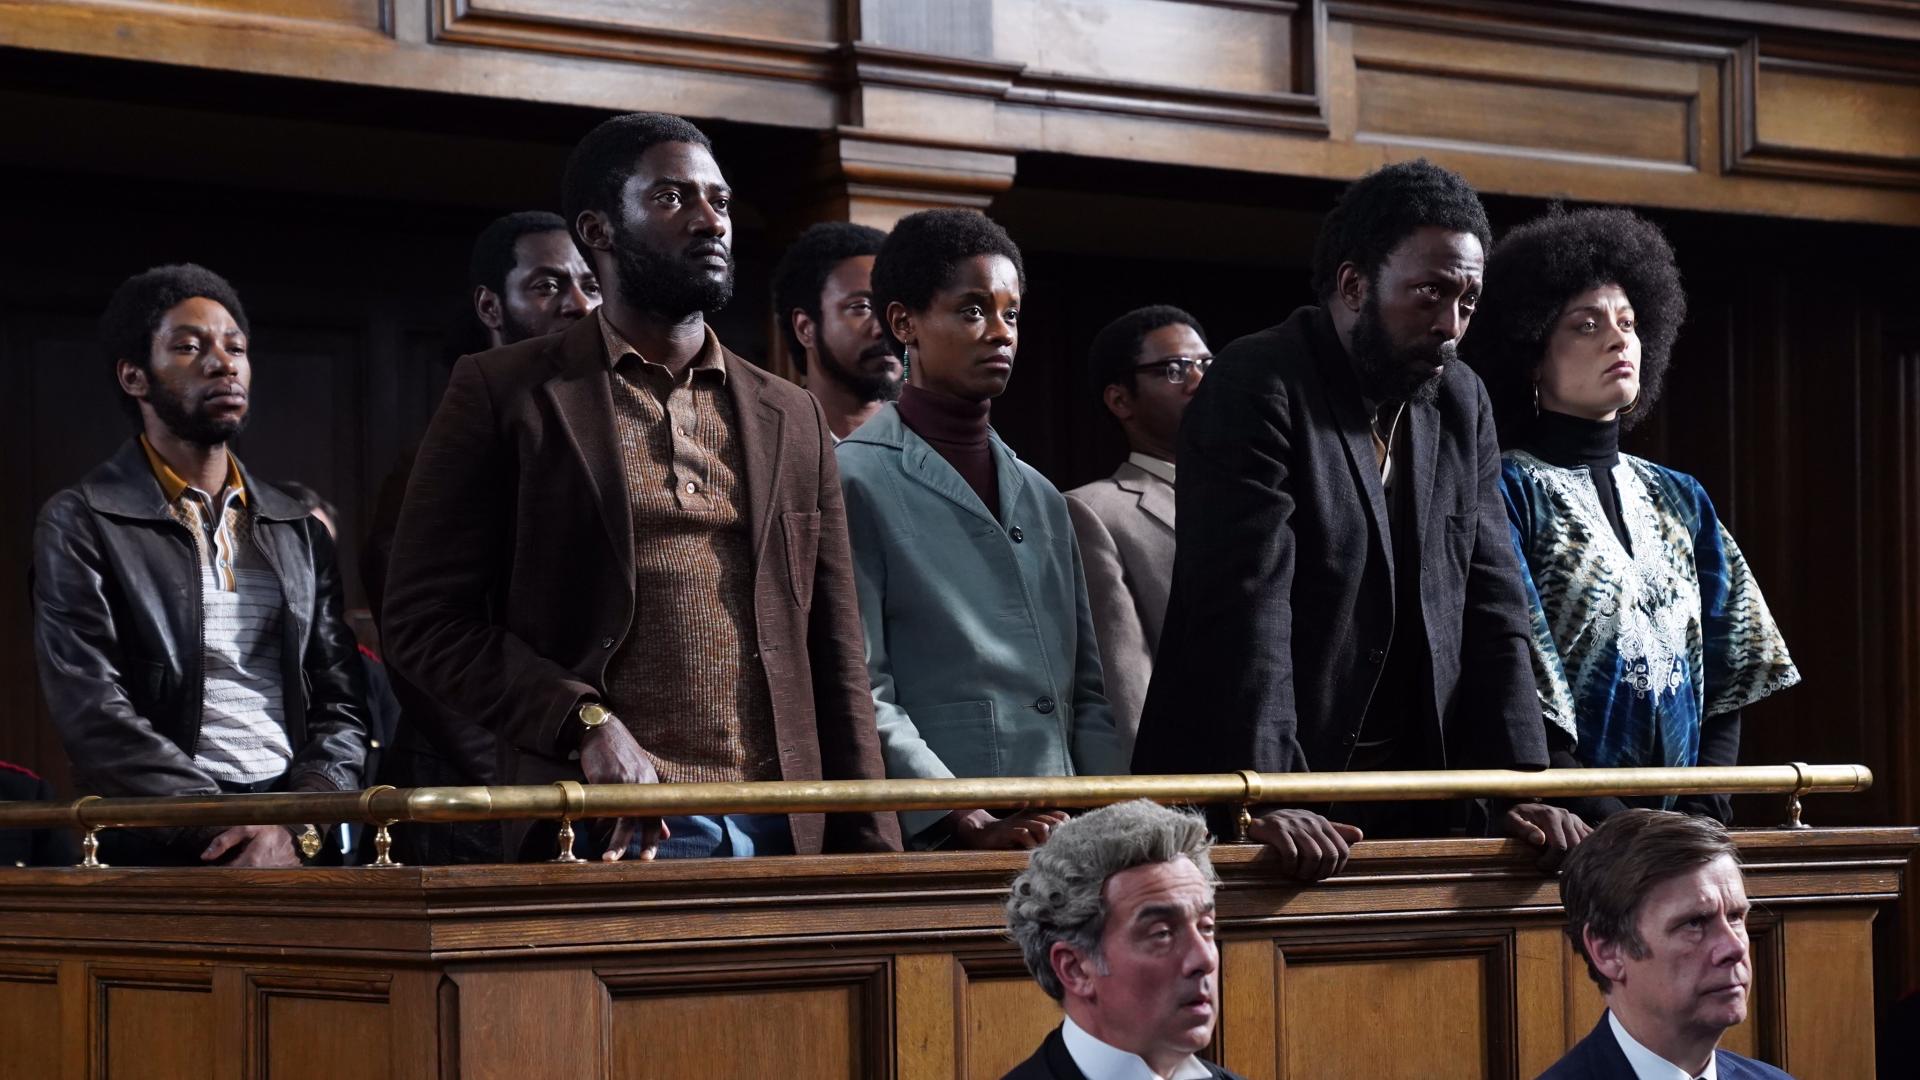 ‘Mangrove’ Review: Steve McQueen’s Tale of Racial Injustice Builds to Thrilling Courtroom Showdown